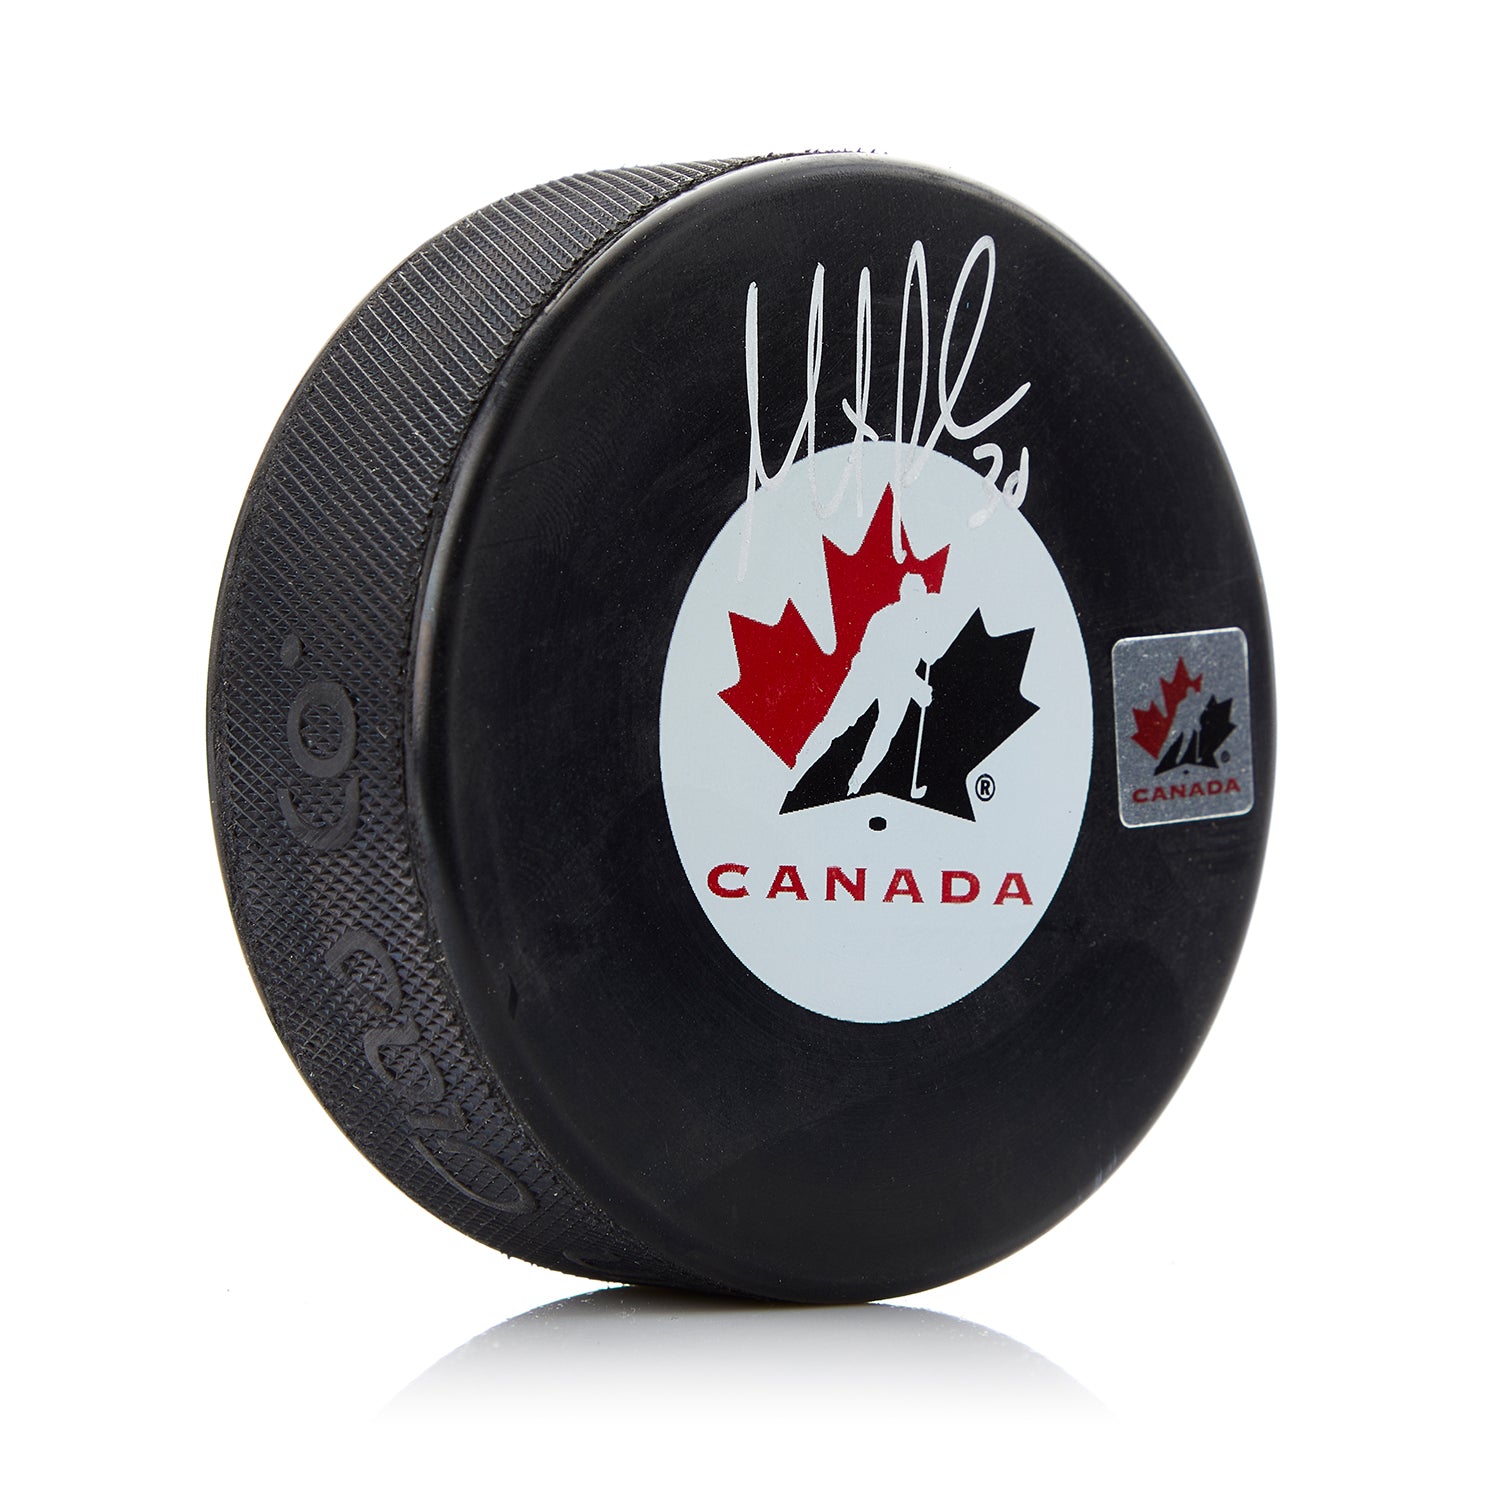 Martin Brodeur Team Canada Autographed Olympic Hockey Puck